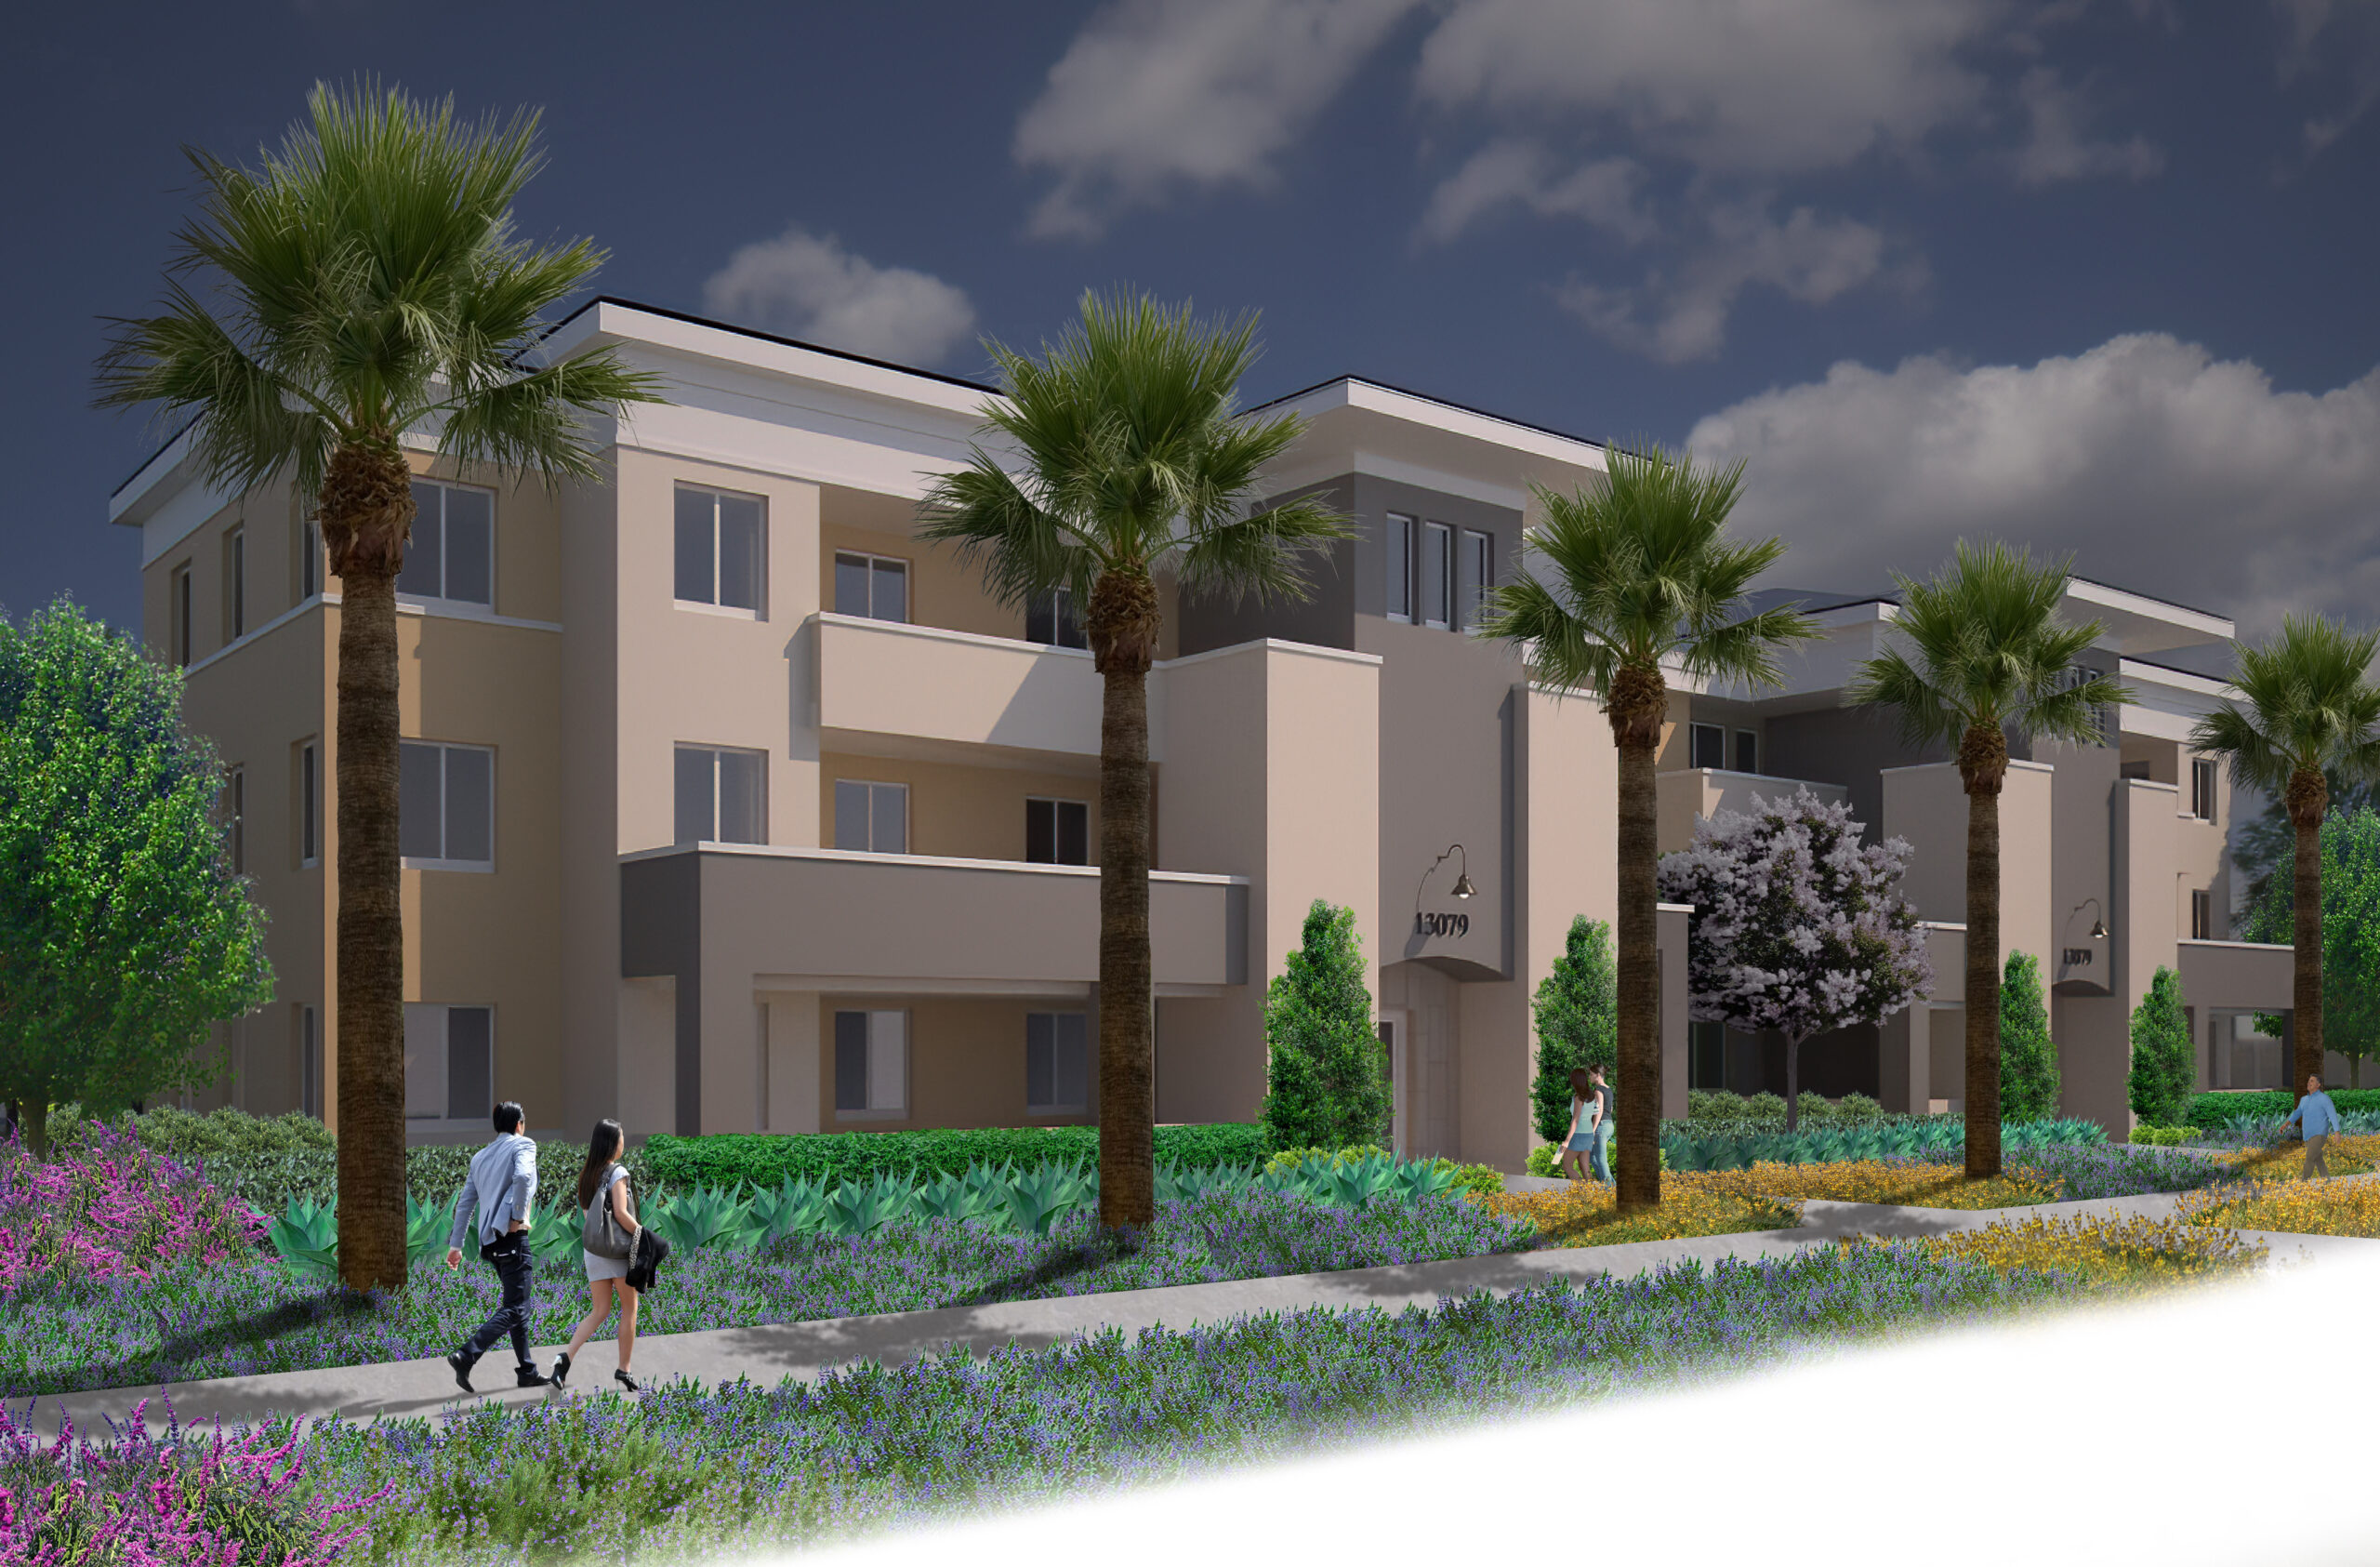 Pacific West Close to Breaking Ground on New Apartment Project in Murrieta – Off of Nutmeg and Washington